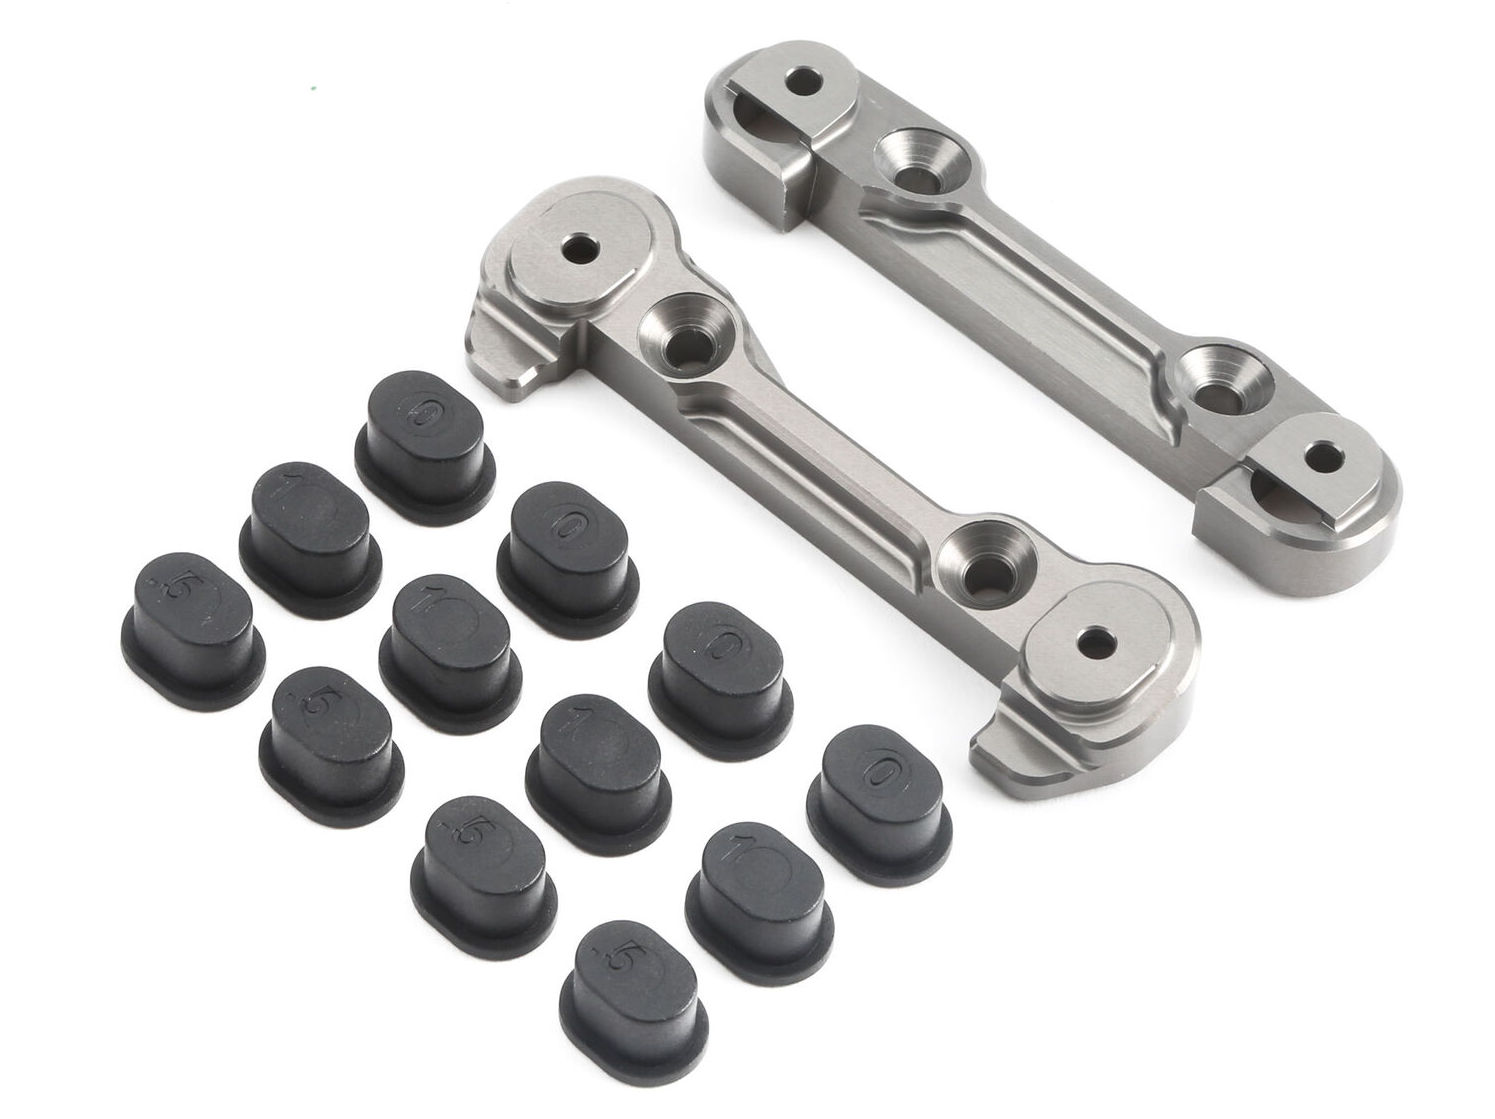 TLR 254000 - Adjustable Front Hinge Pin Brace with Inserts (5IVE B, 5T, MINI WRC)